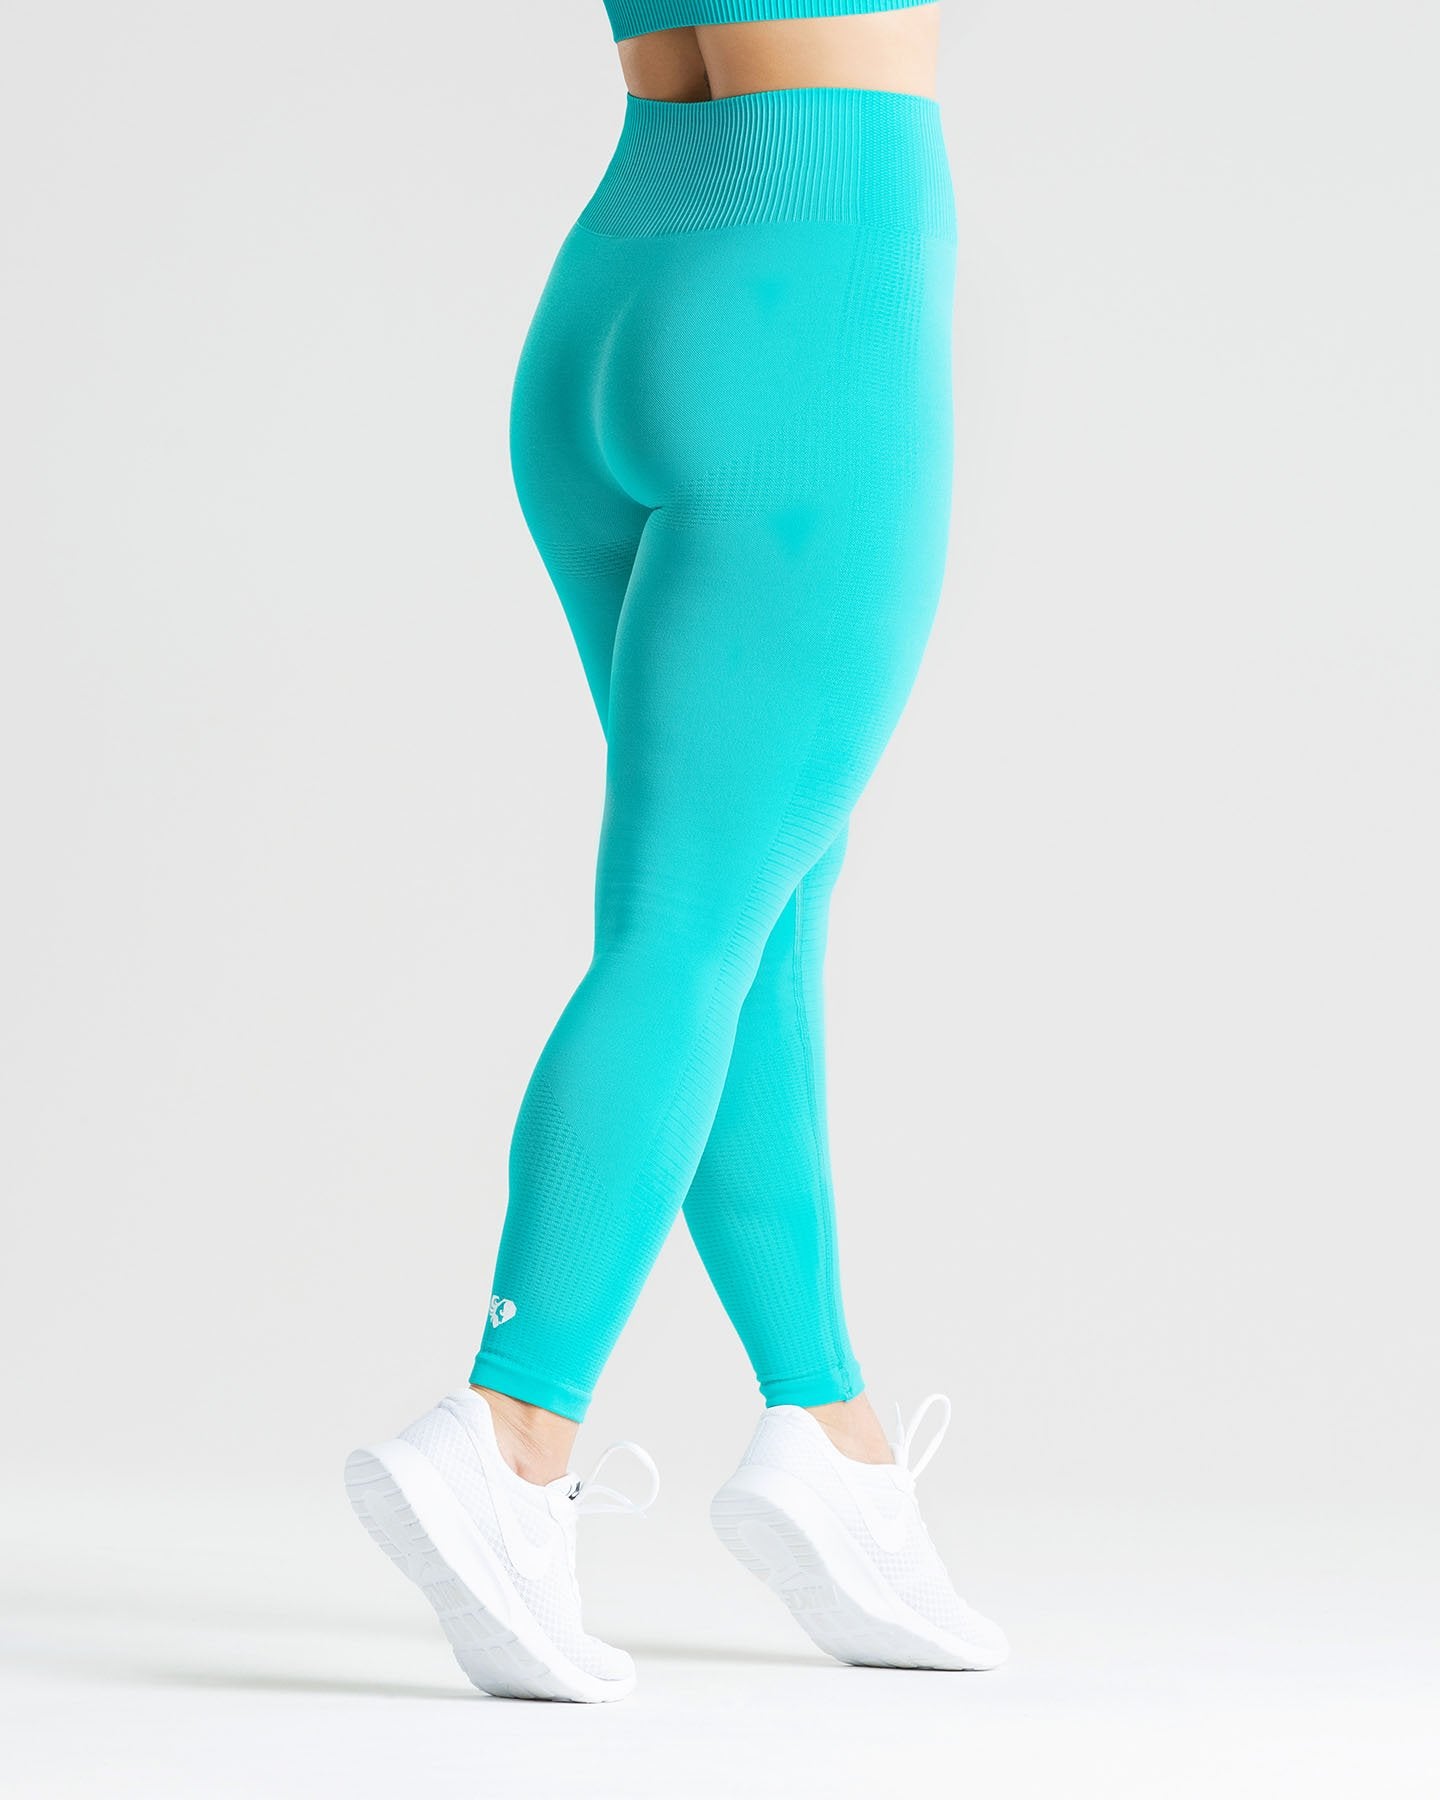 BFAFEN Workout Leggings for Women with Pockets High Waisted Butt